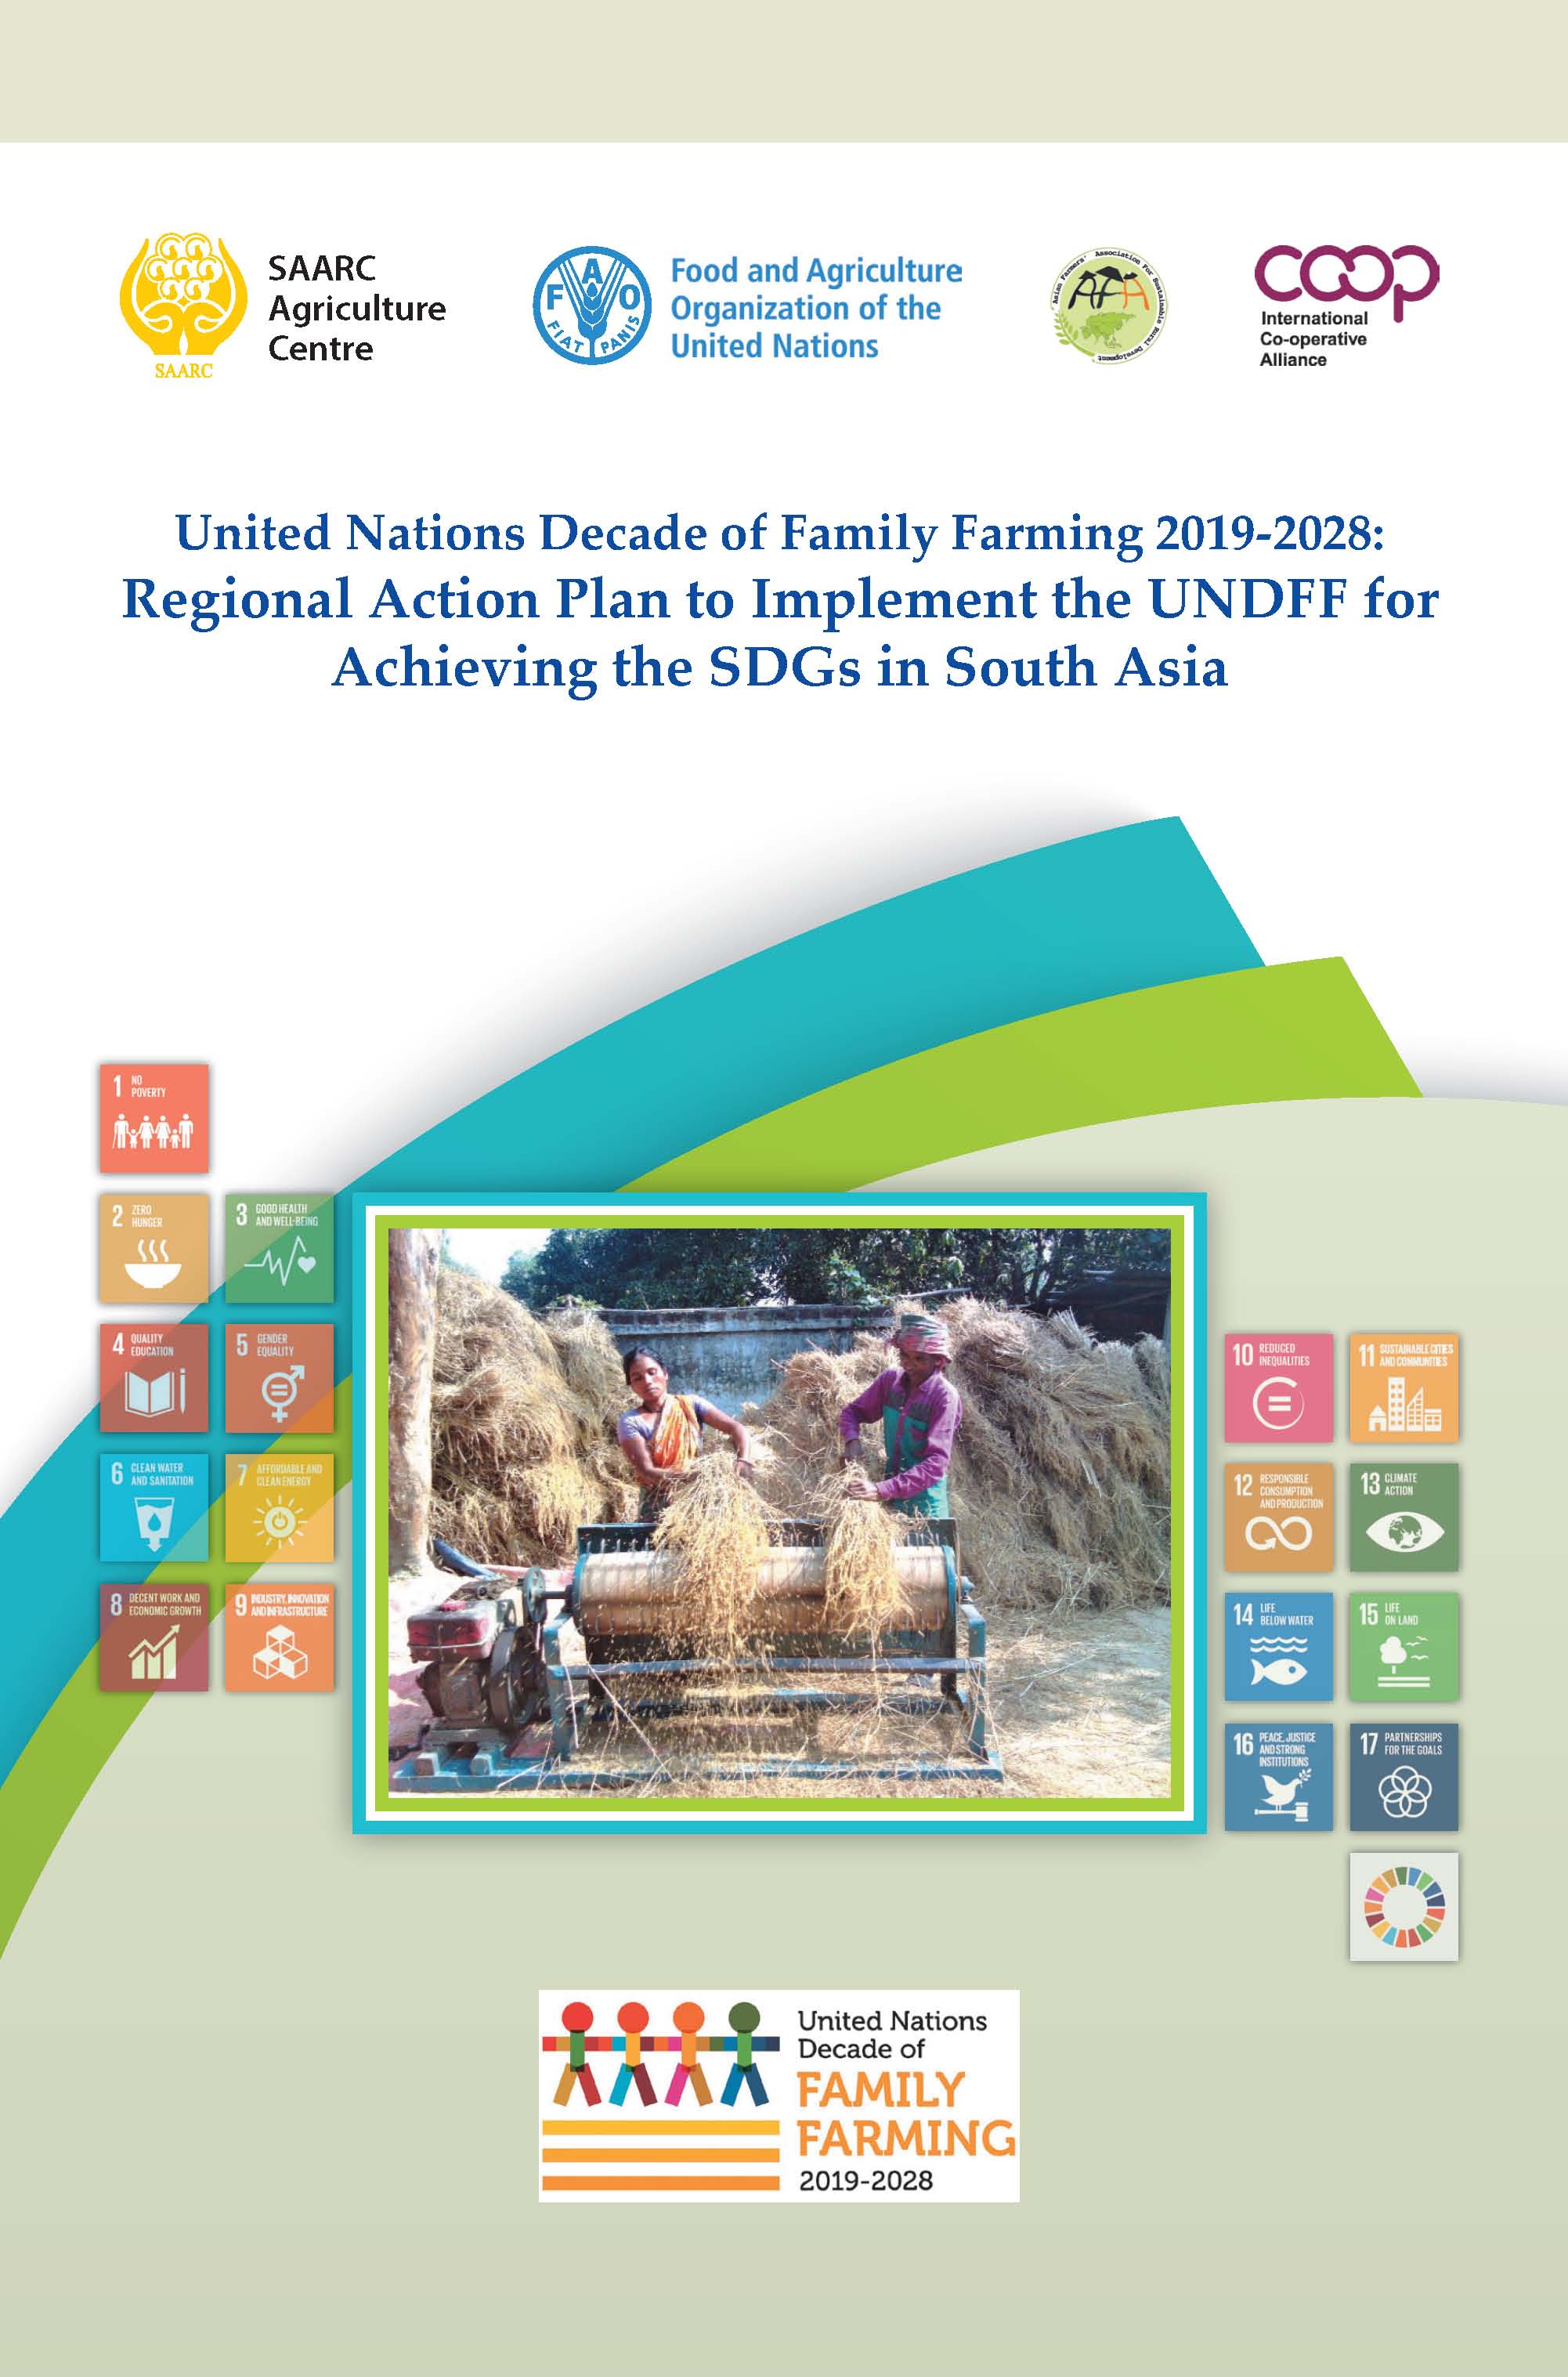 United Nations Decade of Family Farming 2019-2028: Regional Action Plan to Implement the UNDFF for Achieving the SDGs in South Asia